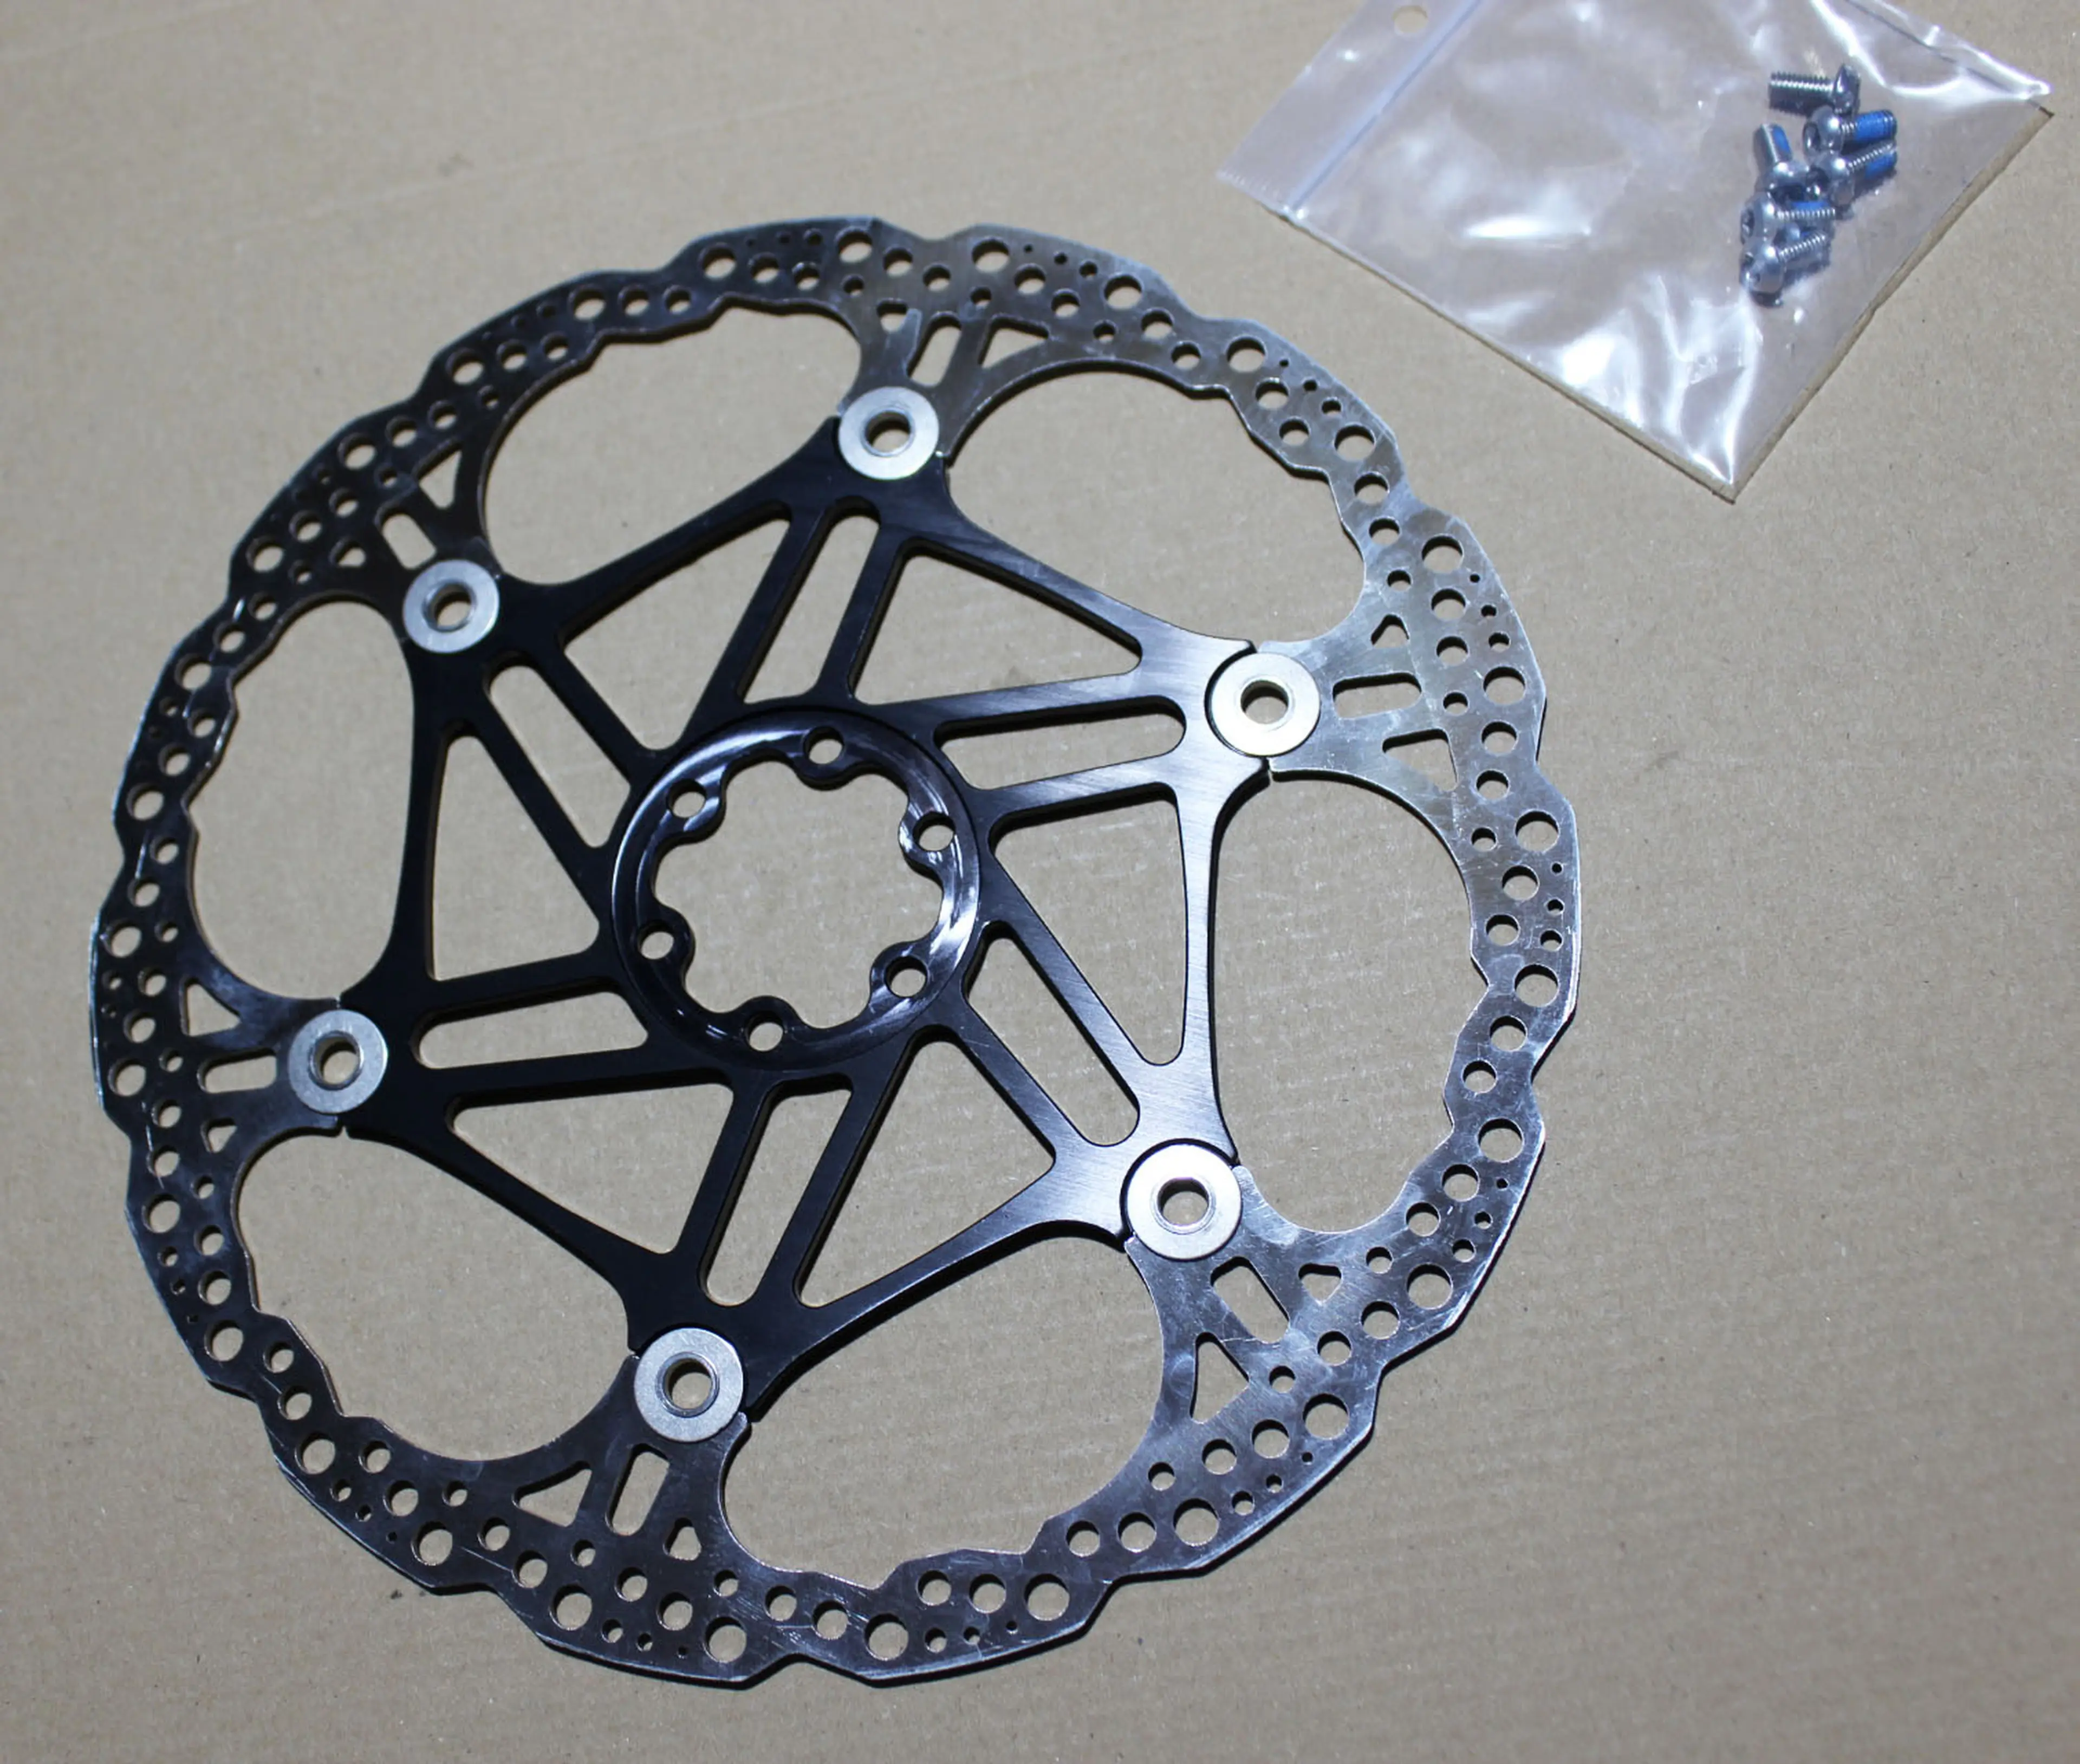 4. Hope Floating 2-piece Downhill - 225mm disc rotor